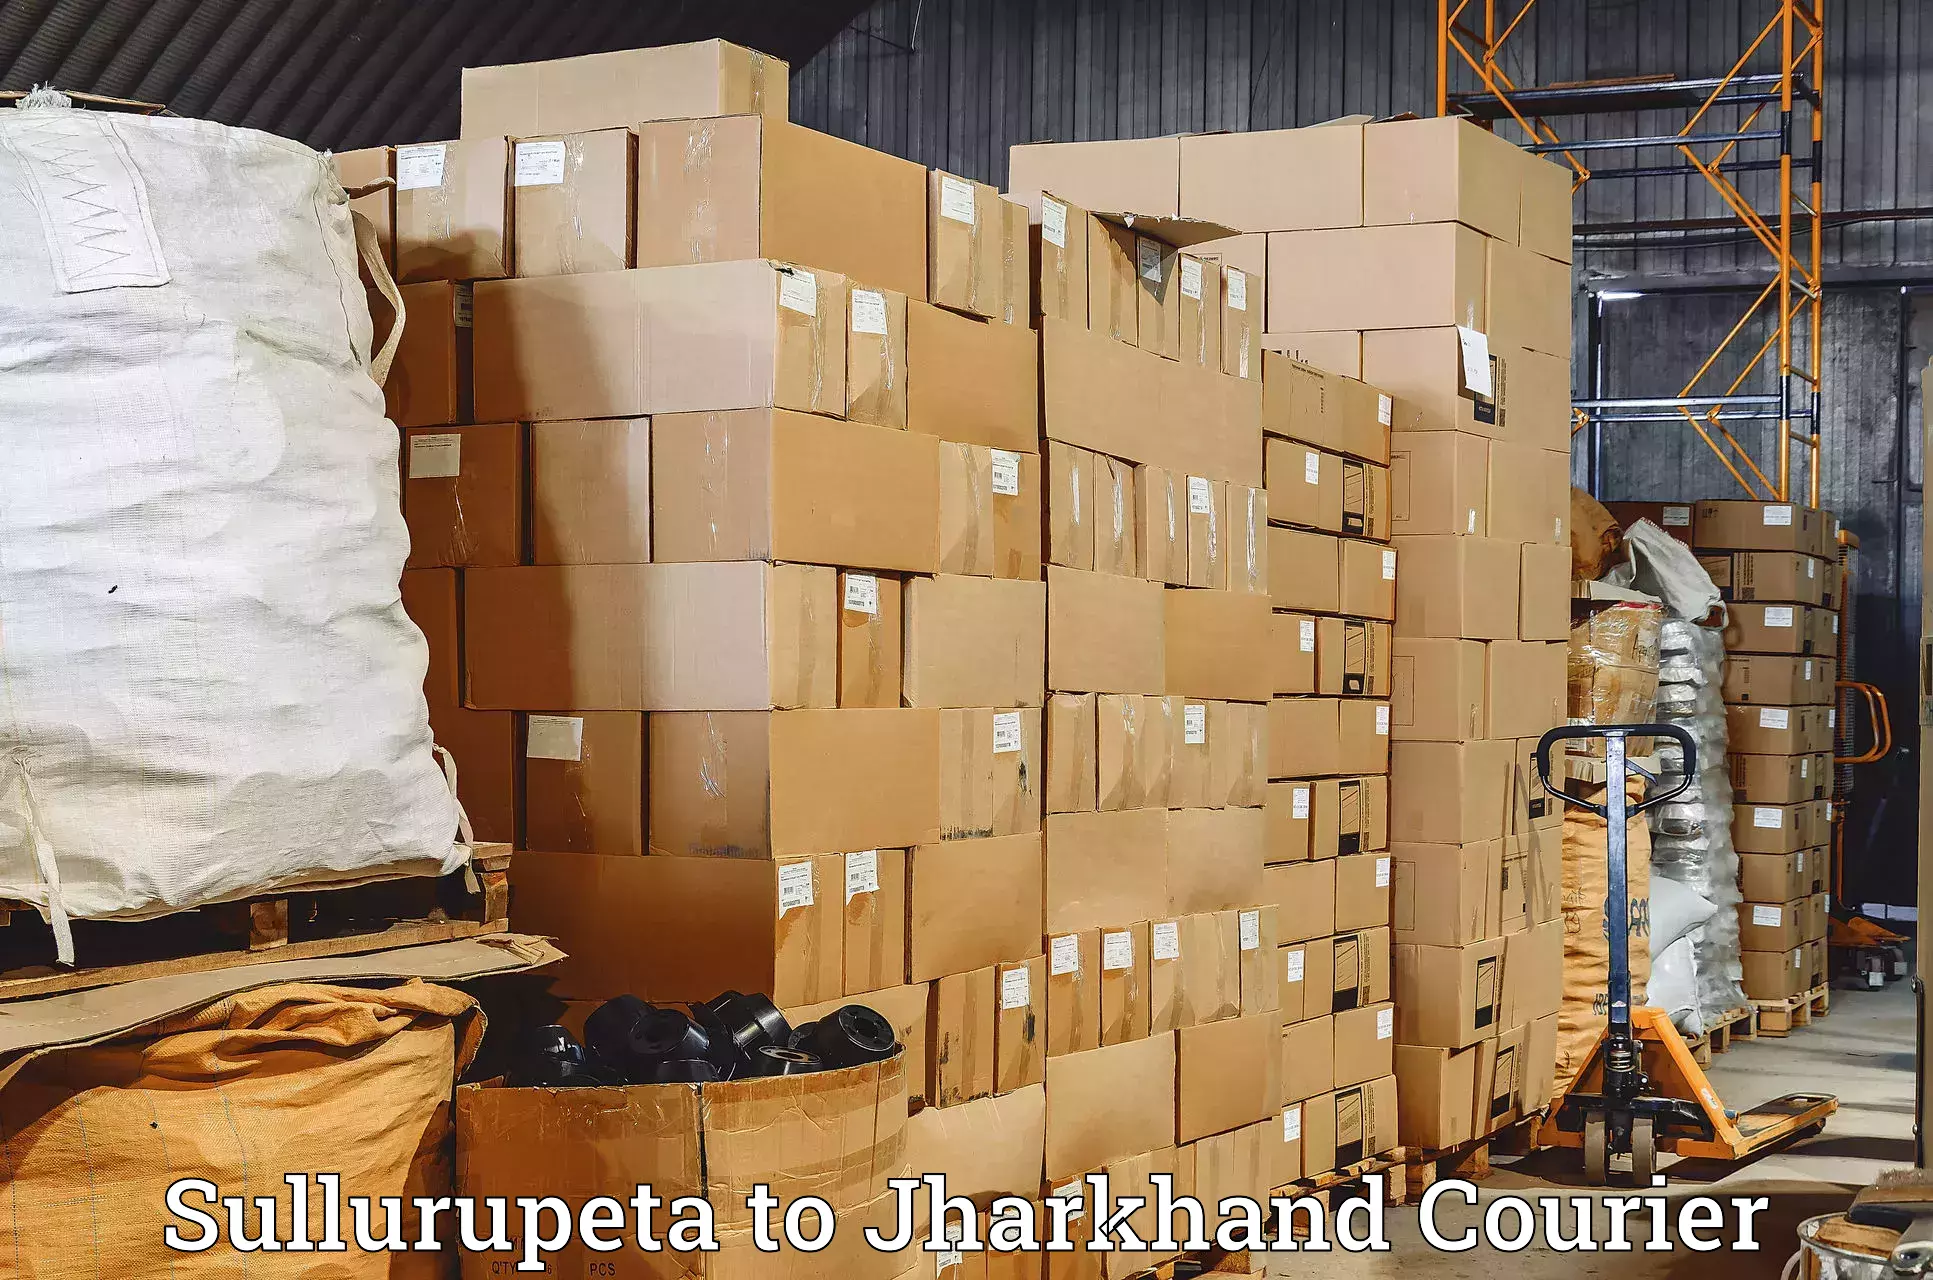 Sustainable courier practices Sullurupeta to Jharkhand